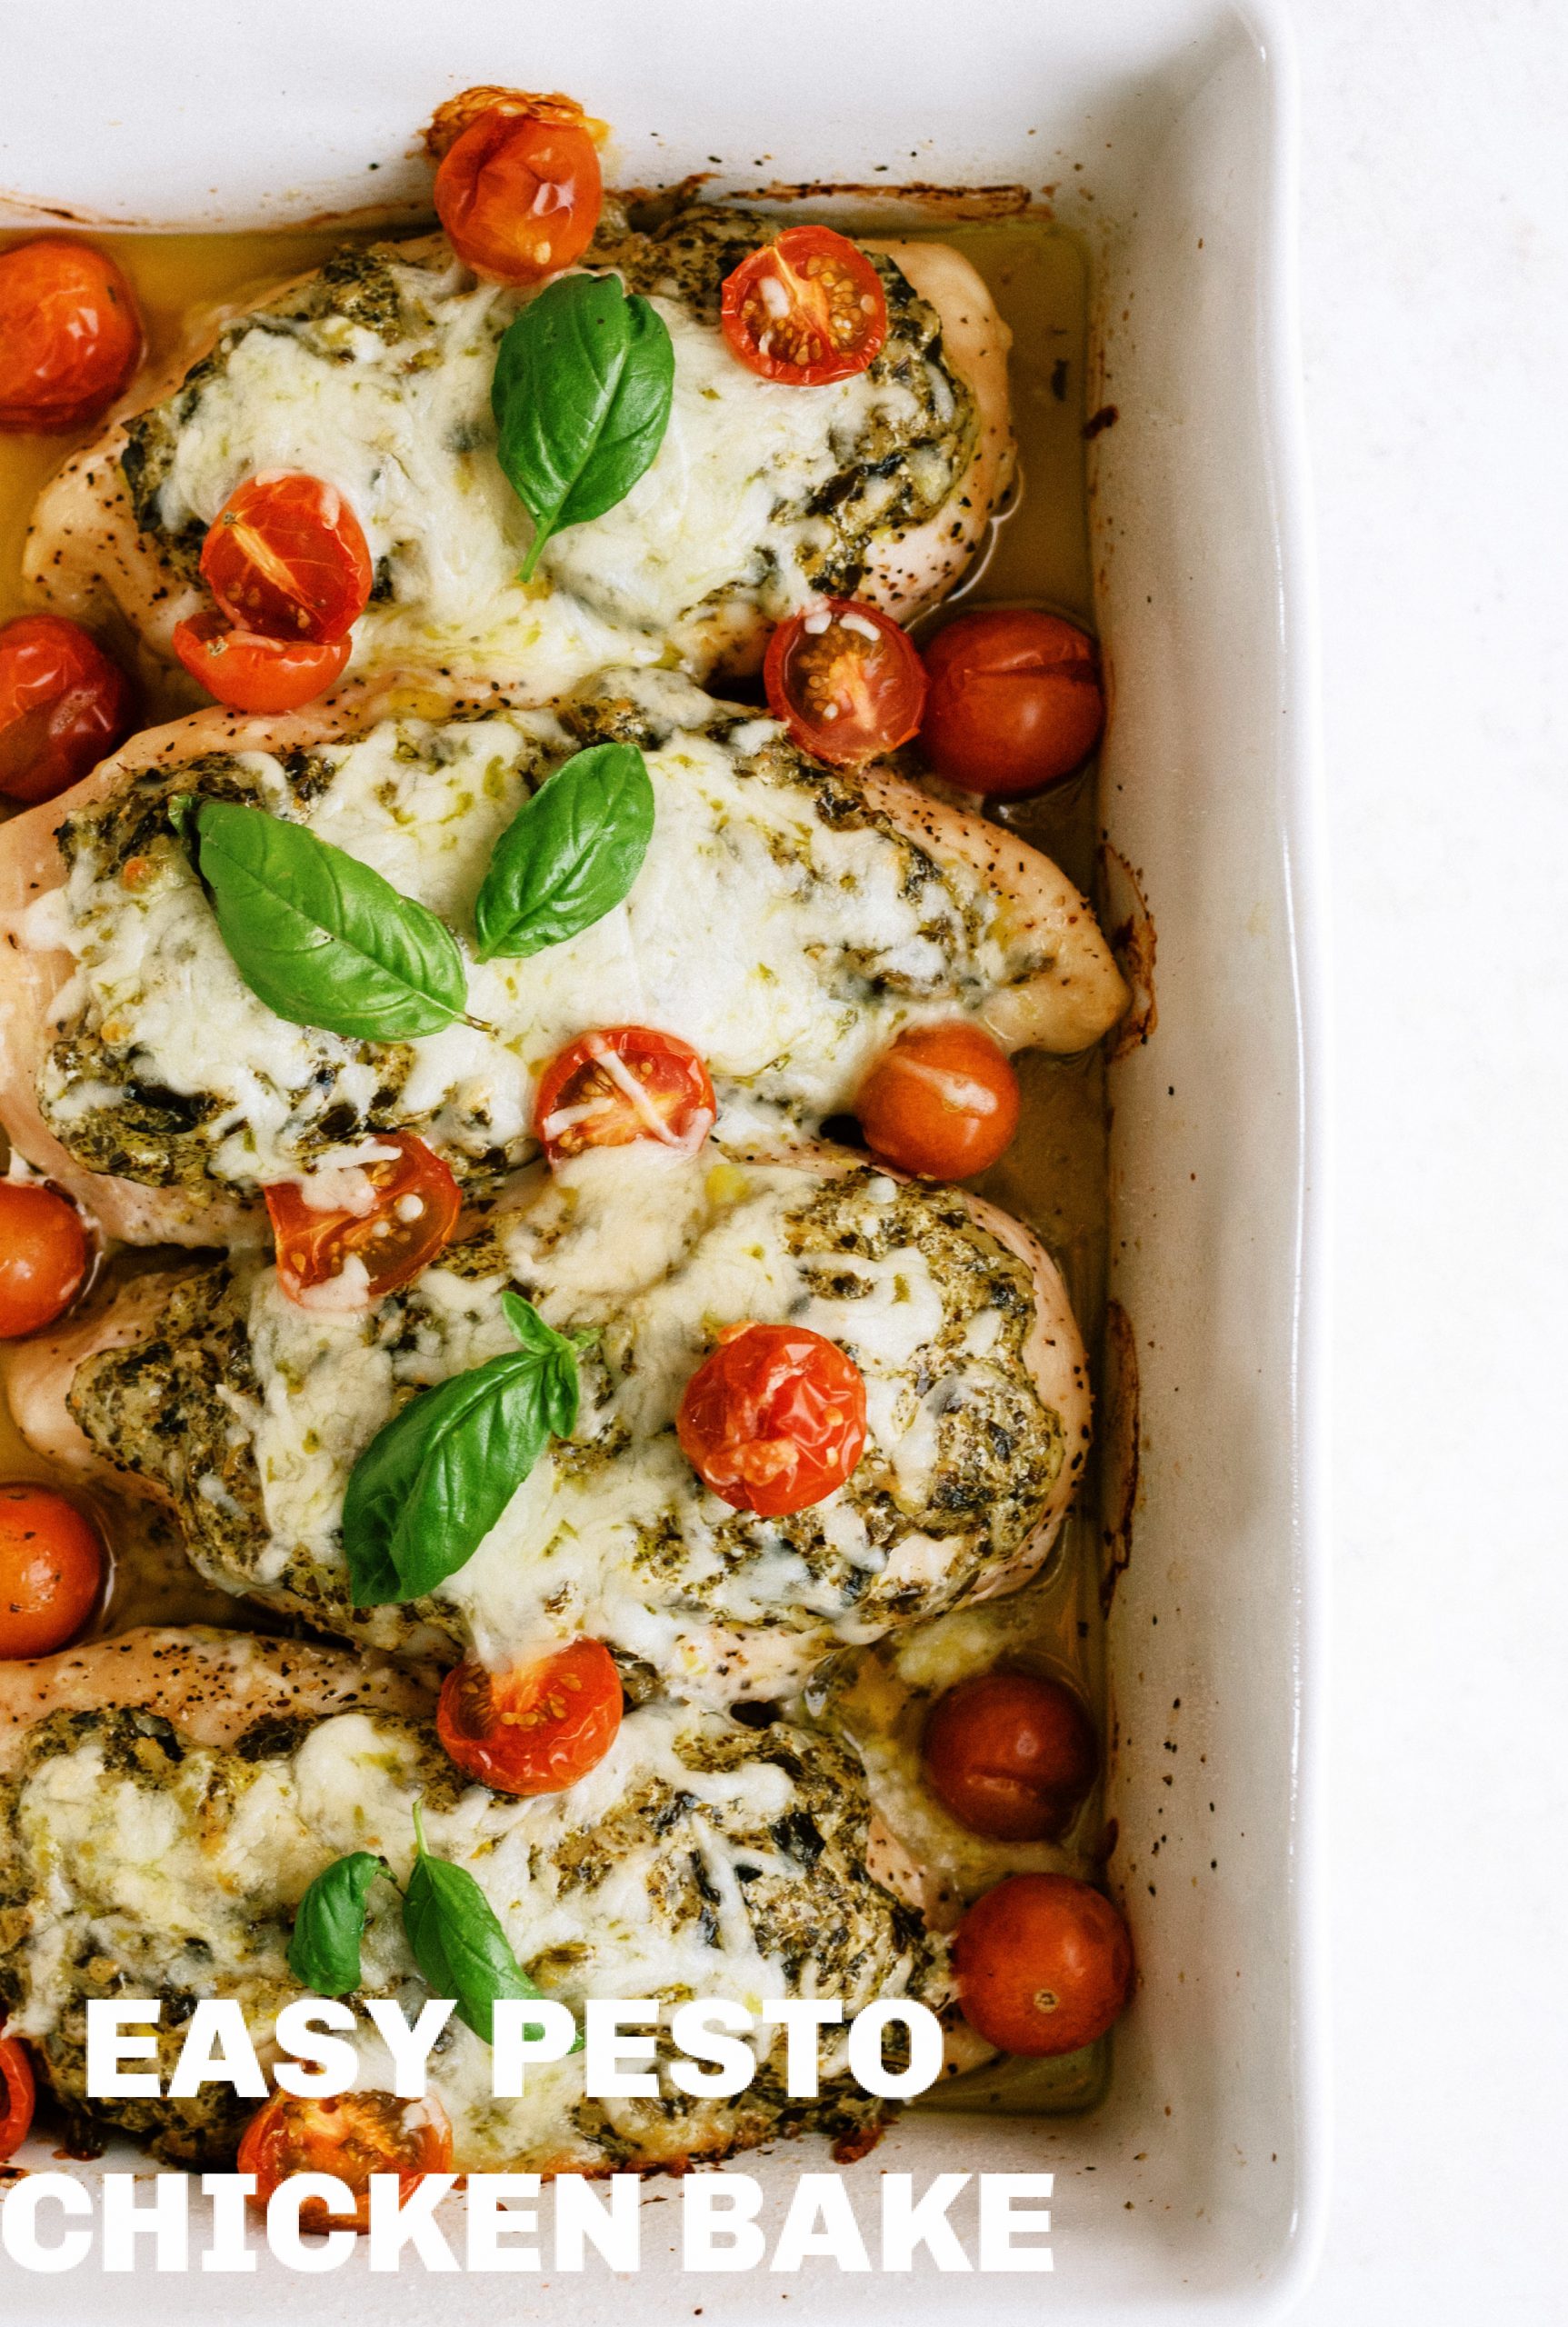 Pesto Chicken Bake with toppings